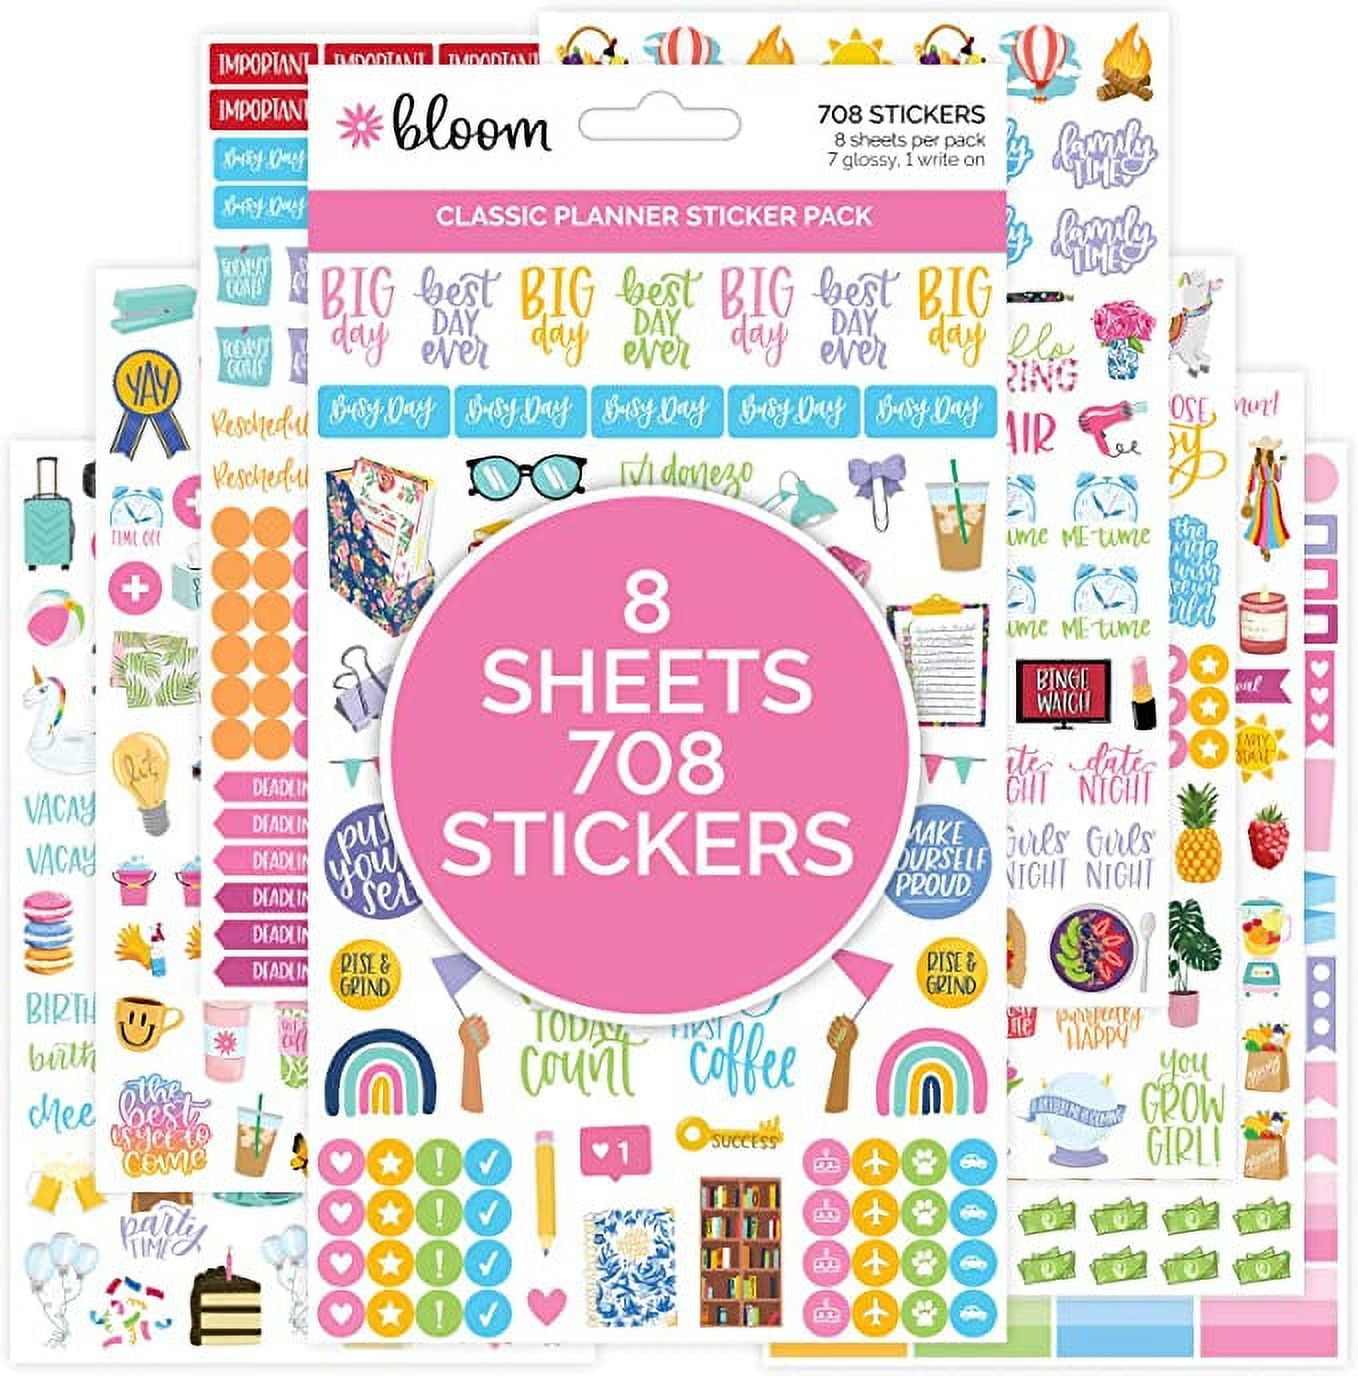 Bloom Daily Planners Newly Improved Classic Planner Sticker Sheets - Variety Sticker Pack for Decorating, Planning, Scrapbooking, etc. - 708 Stickers